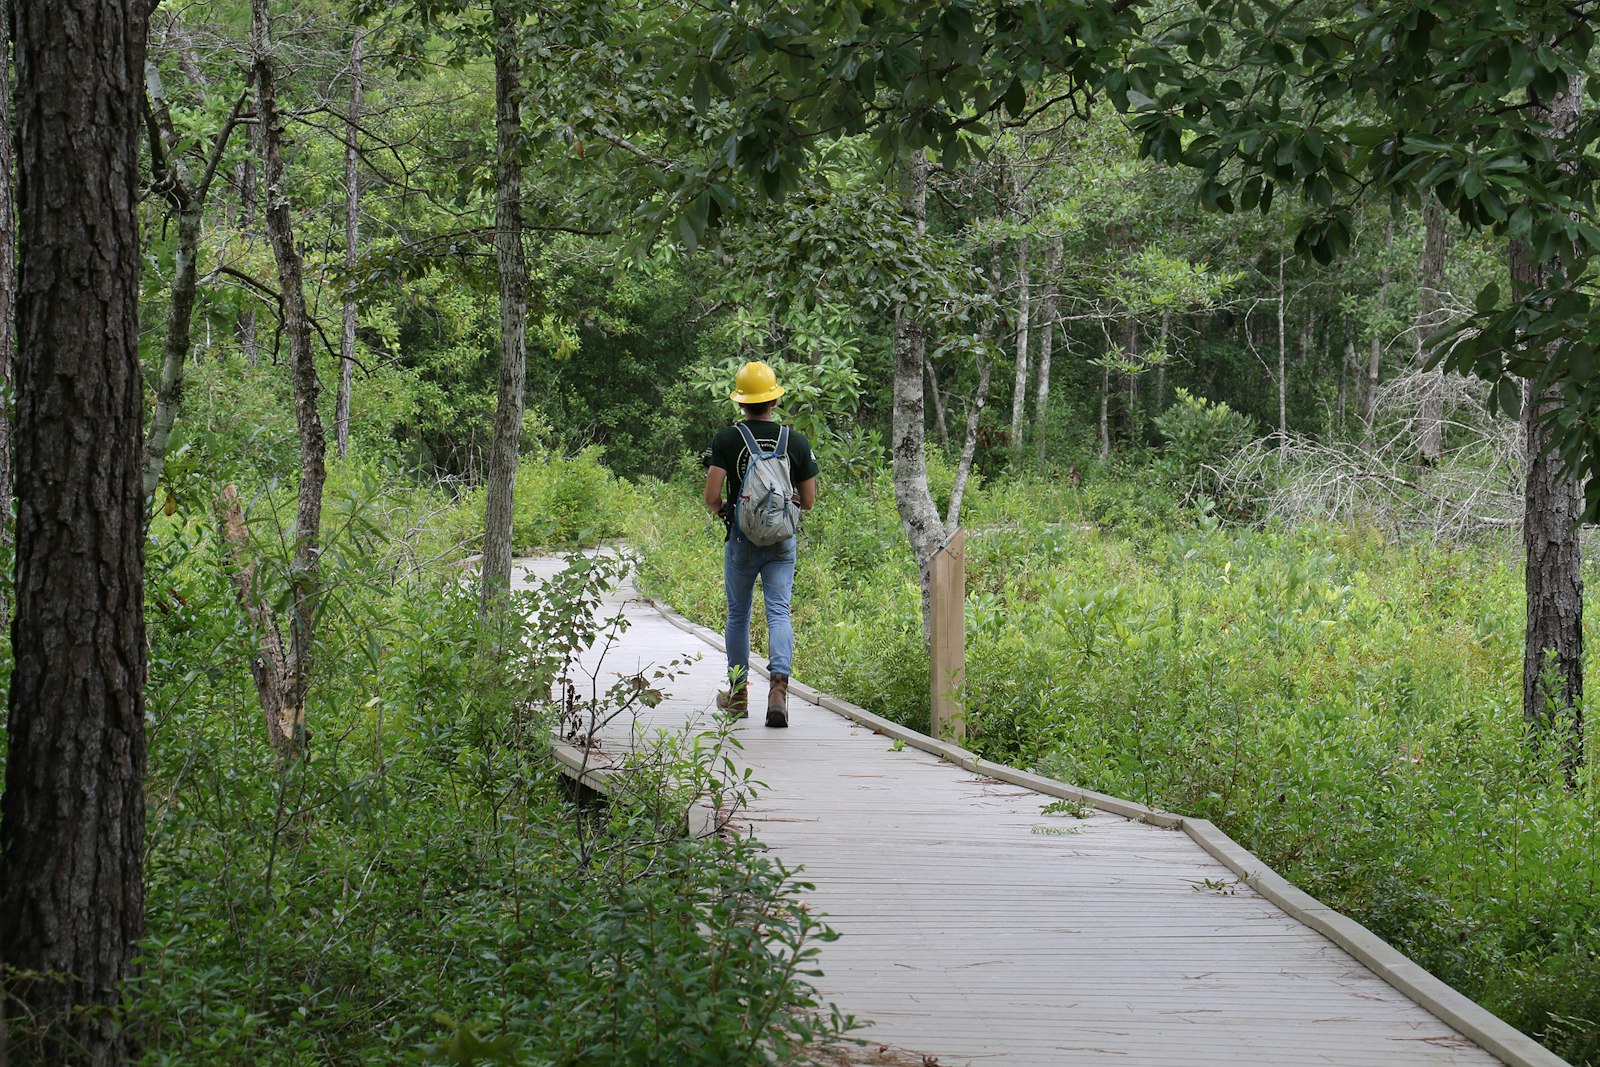 A person wearing a hard hat walks on an elevated wooden platform through a marsh